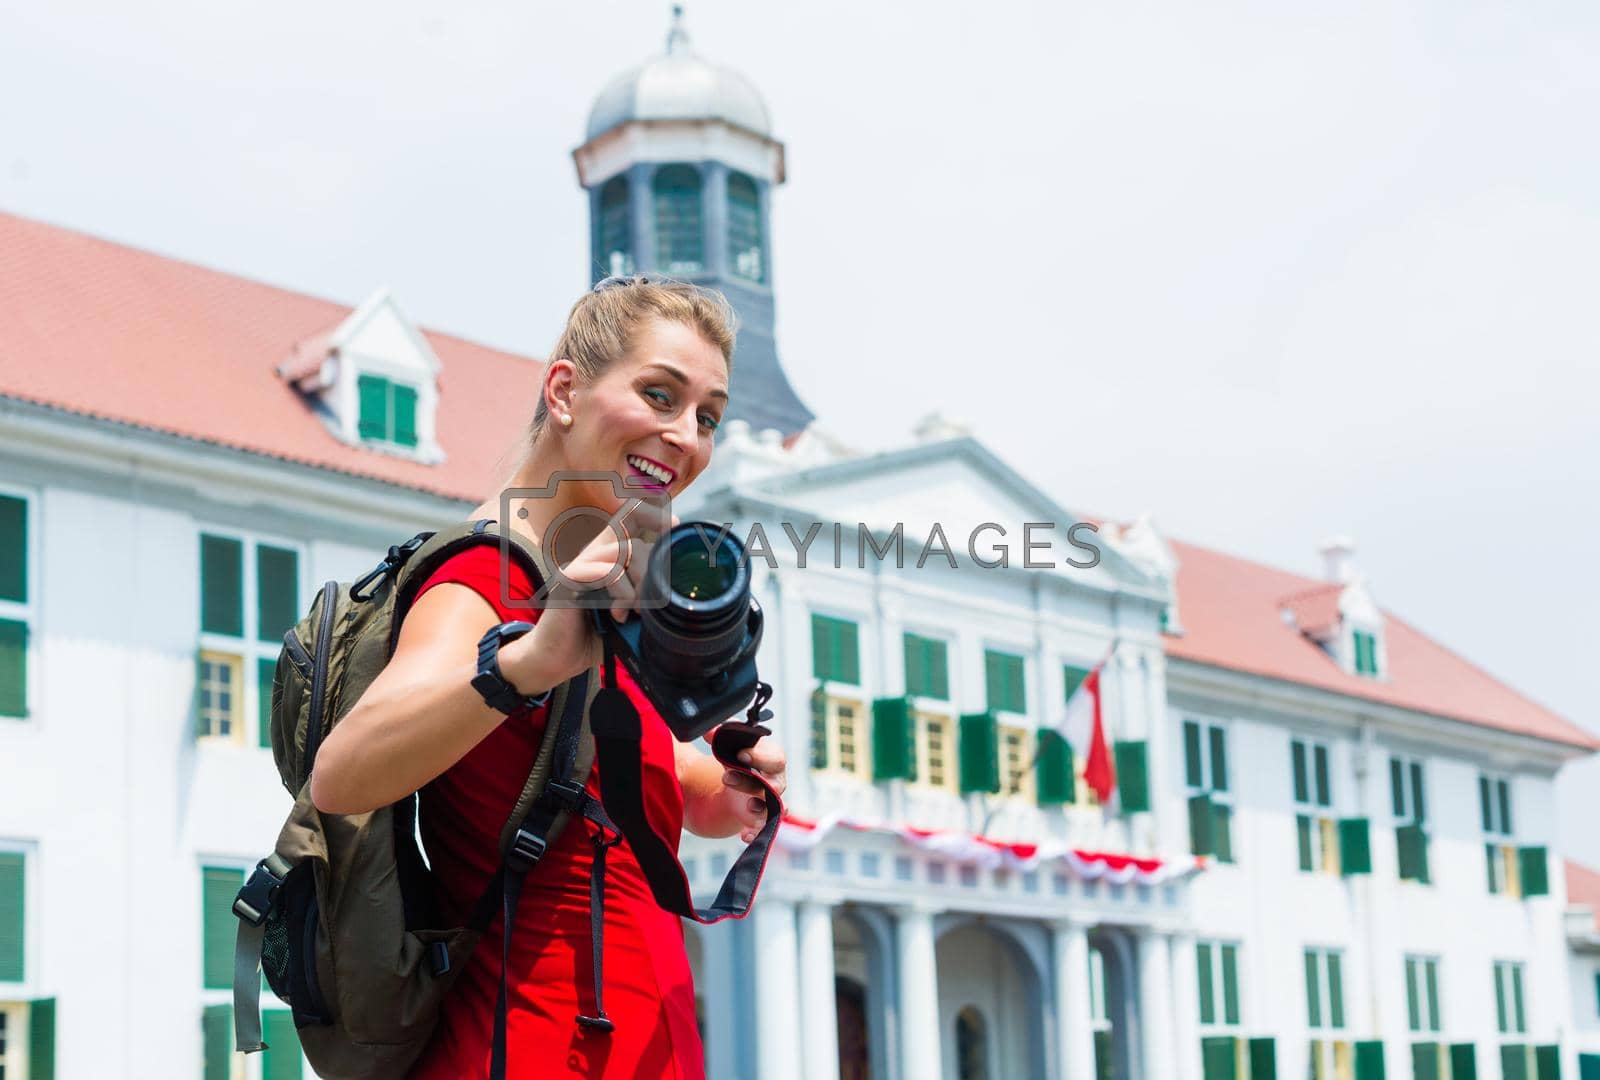 Royalty free image of Tourist taking pictures sightseeing in Jakarta, Indonesia by Kzenon